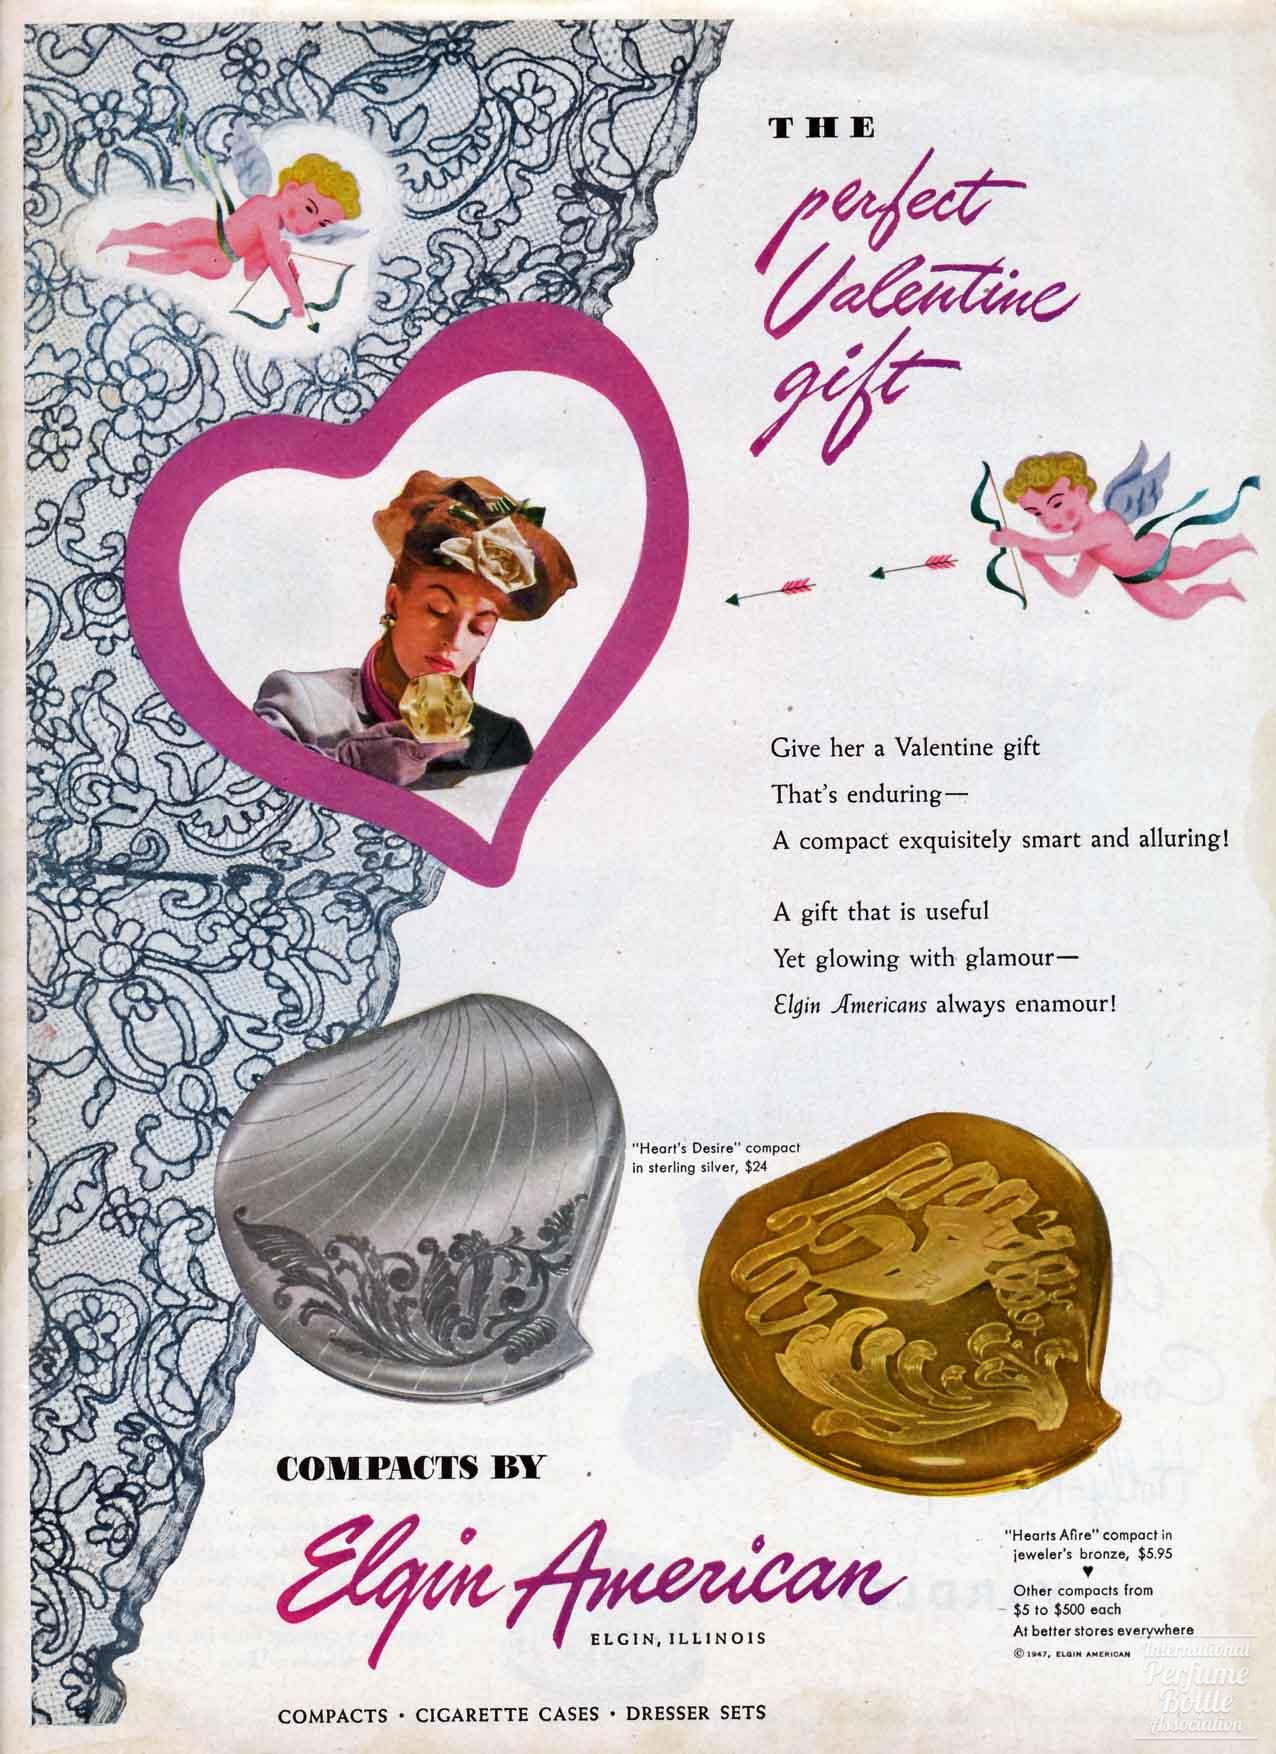 Heart Shaped Compacts by Elgin Advertisement - 1947